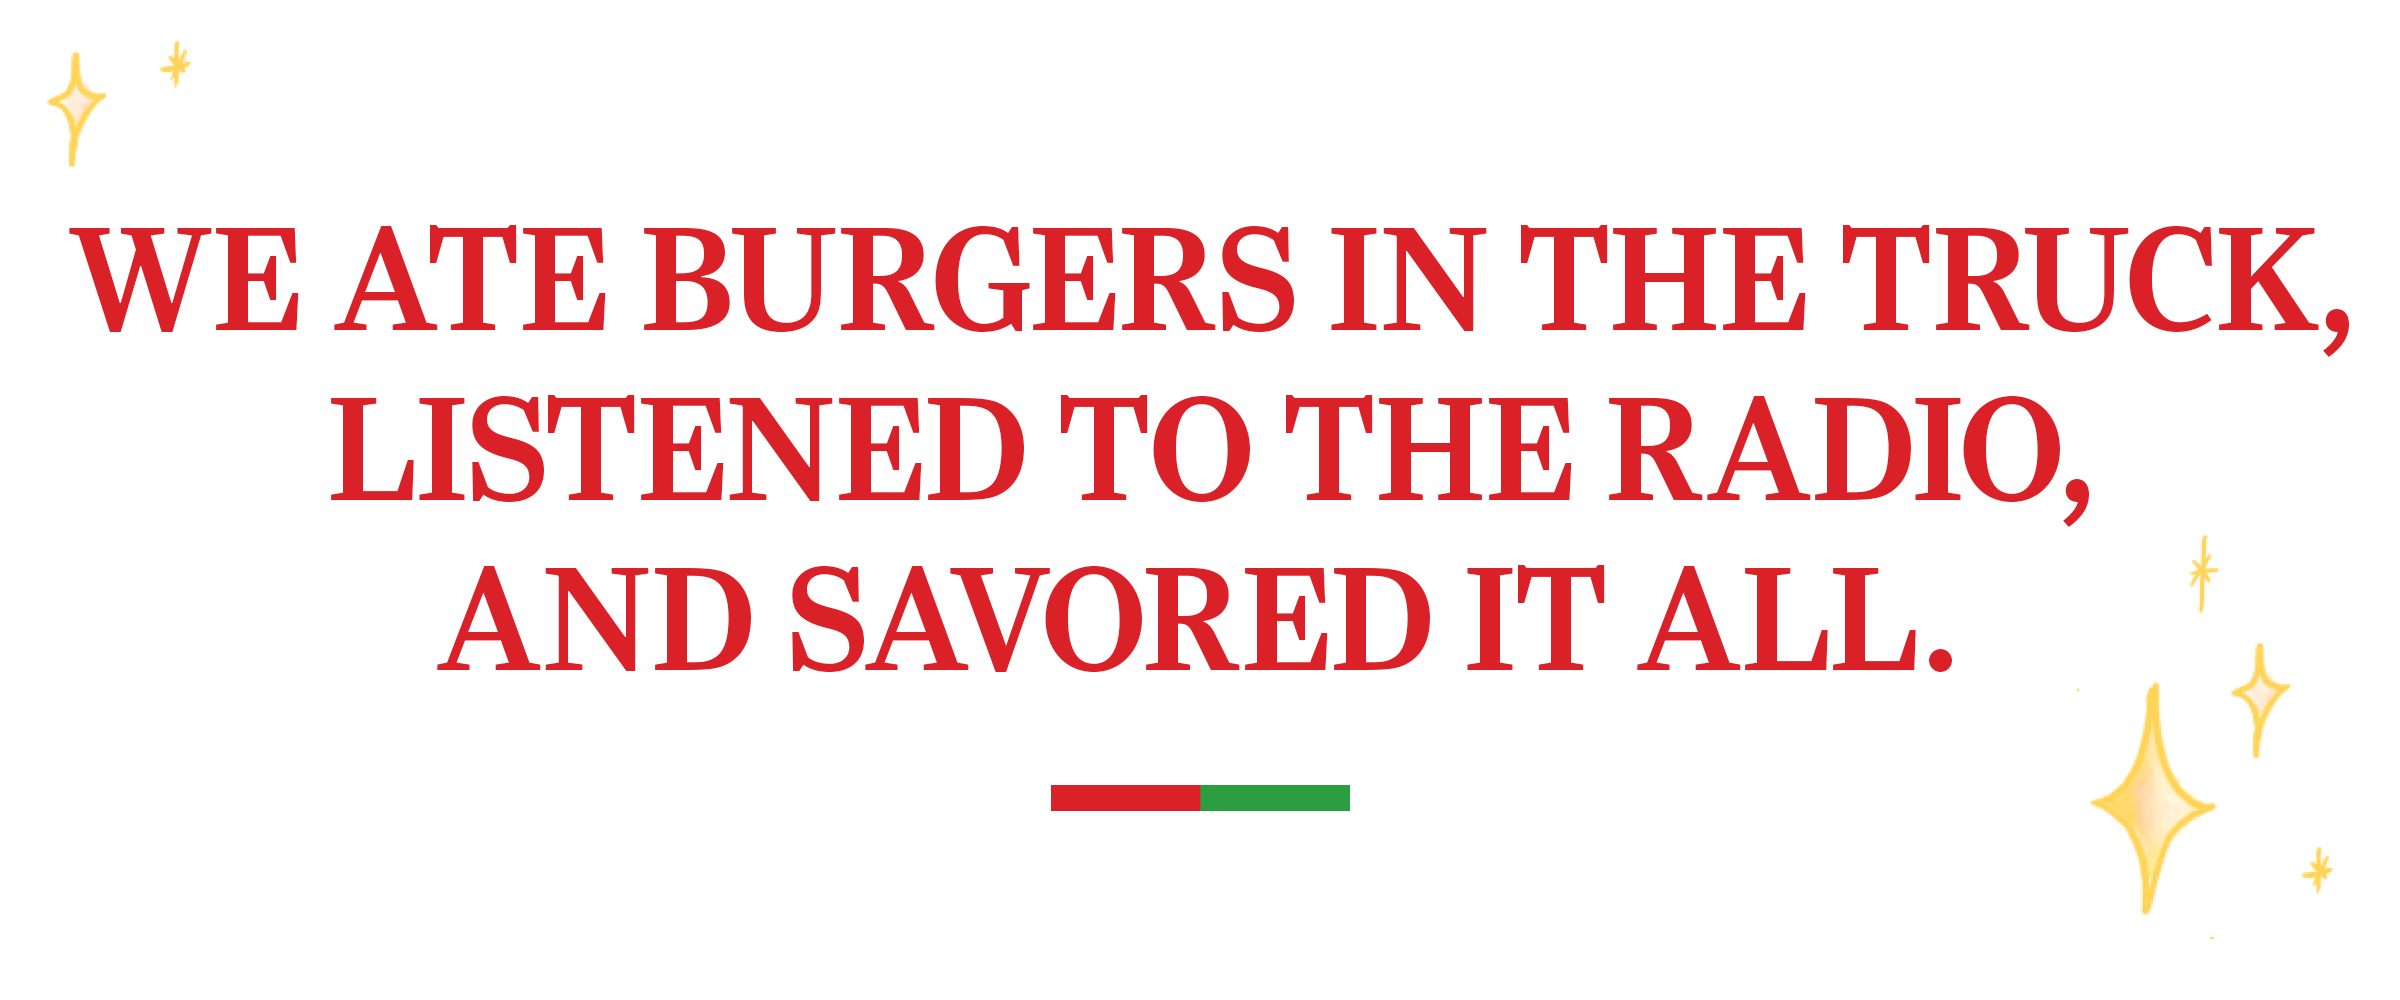 text: We ate burgers in the truck, listened to the radio, and savored it all. 